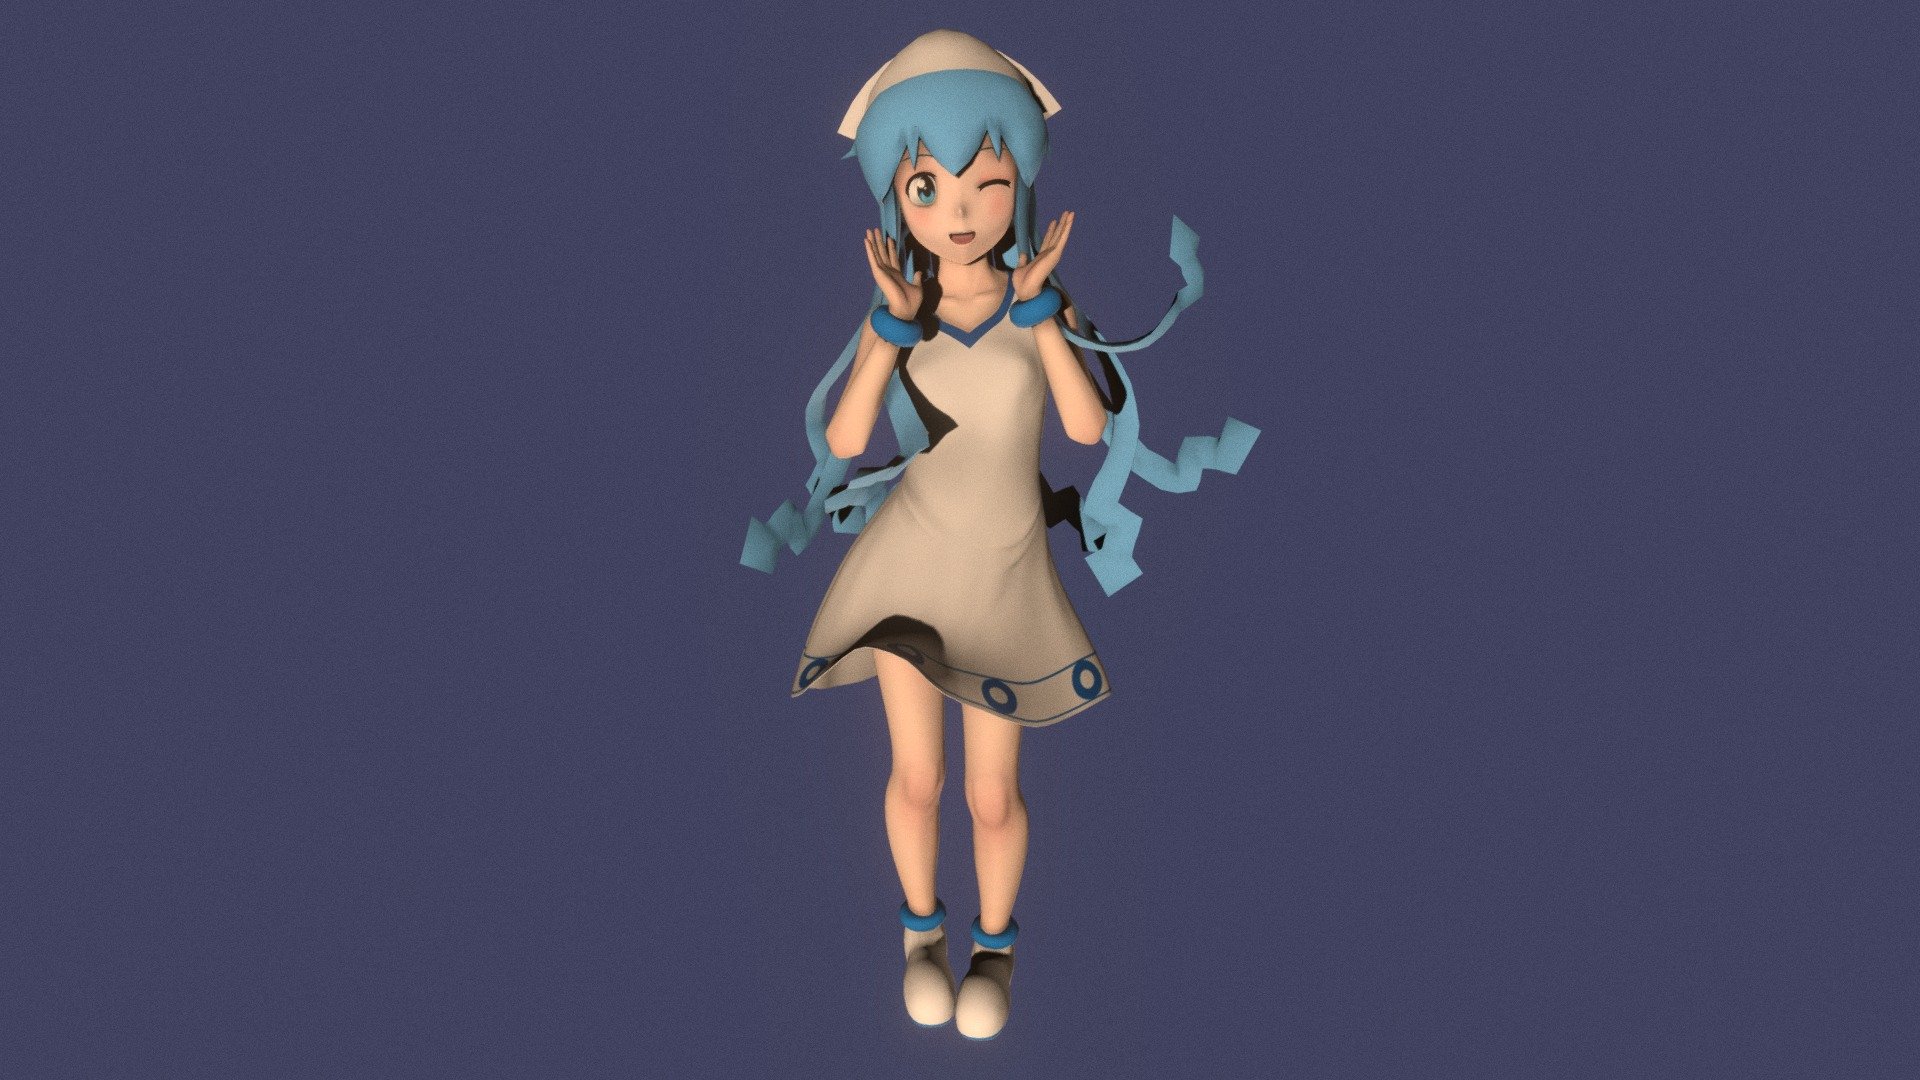 Posed model of anime girl Ika Musume (Shinryaku! Ika Musume).

This product include .FBX (ver. 7200) and .MAX (ver. 2010) files.

Rigged version: https://sketchfab.com/3d-models/ika-musume-e6d93282efbe44e4ba1b65c499e5f06b

I support convert this 3D model to various file formats: 3DS; AI; ASE; DAE; DWF; DWG; DXF; FLT; HTR; IGS; M3G; MQO; OBJ; SAT; STL; W3D; WRL; X.

You can buy all of my models in one pack to save cost: https://sketchfab.com/3d-models/all-of-my-anime-girls-c5a56156994e4193b9e8fa21a3b8360b

And I can make commission models.

If you have any questions, please leave a comment or contact me via my email 3d.eden.project@gmail.com 3d model